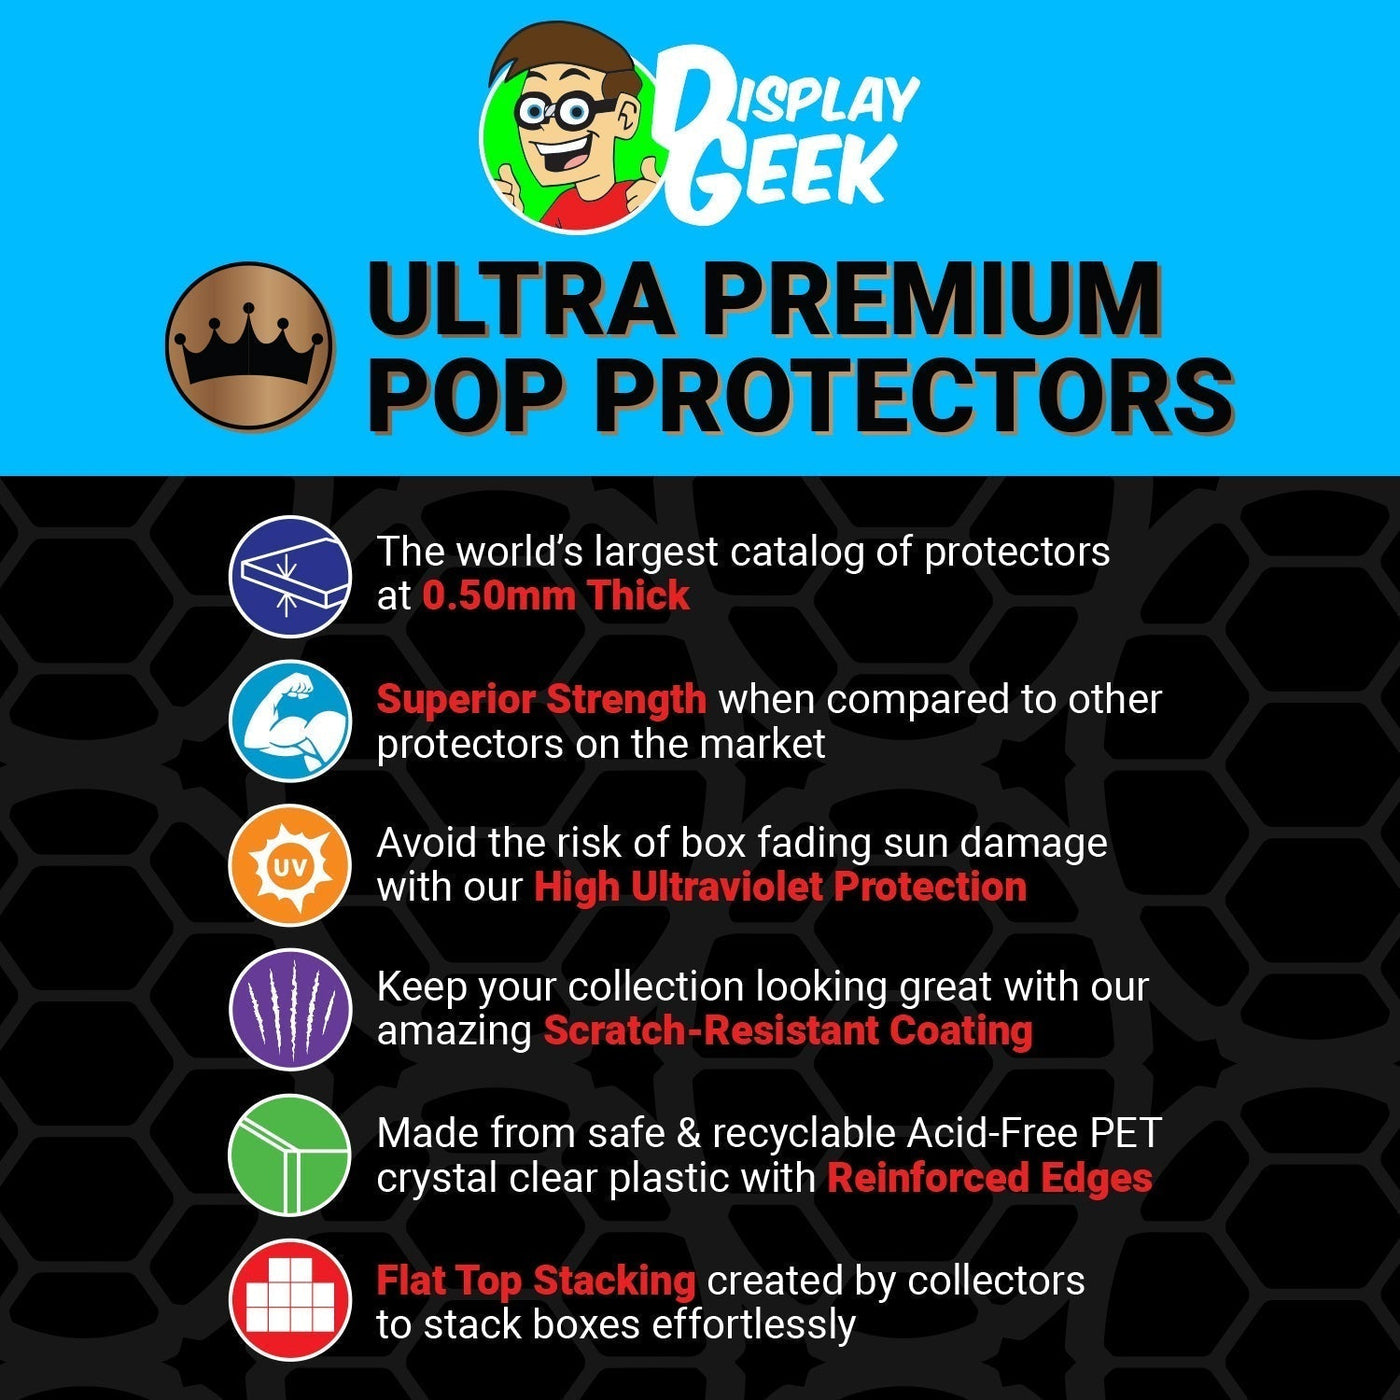 Pop Protector for Victory Shawarma Bruce Banner #755 Funko Pop Deluxe on The Protector Guide App by Display Geek